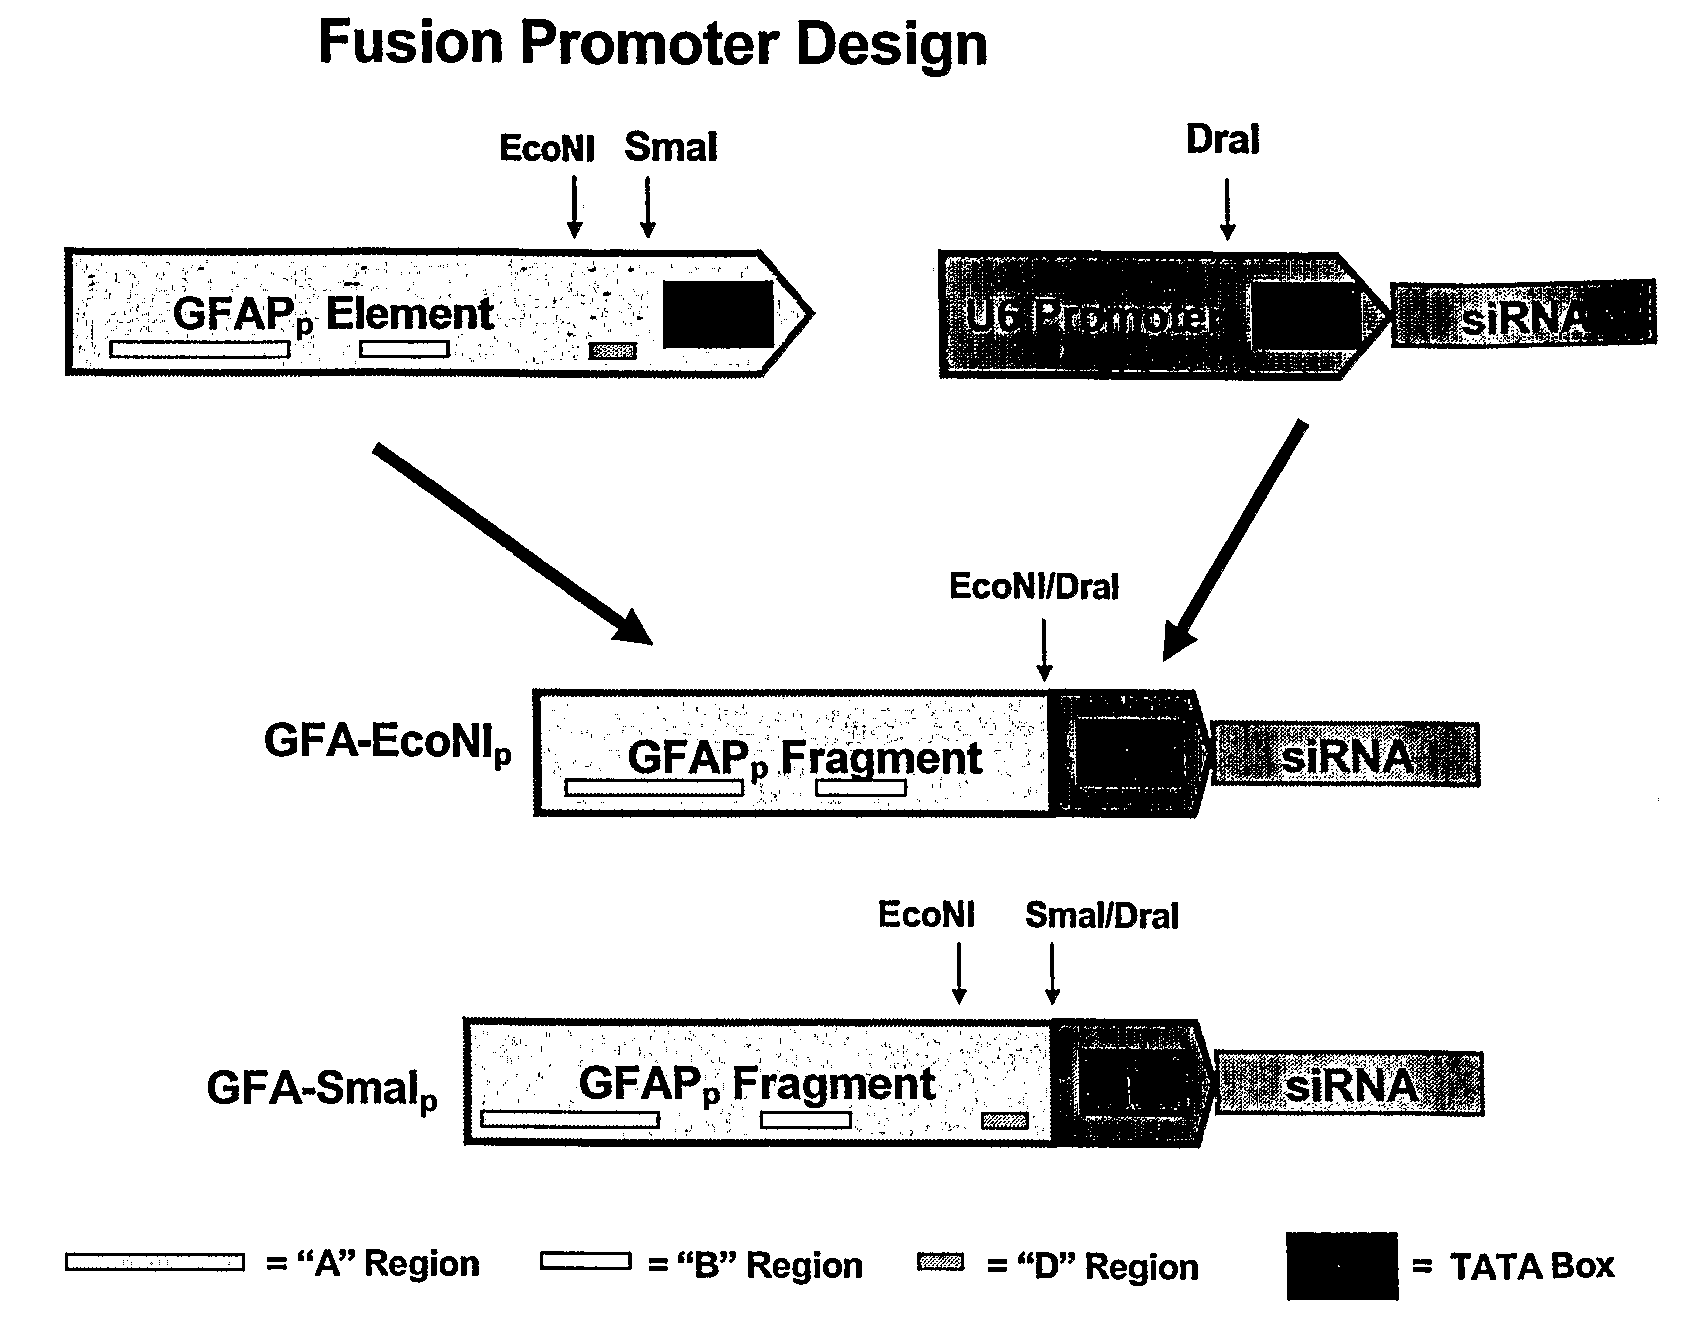 Regulatable fusion promoters